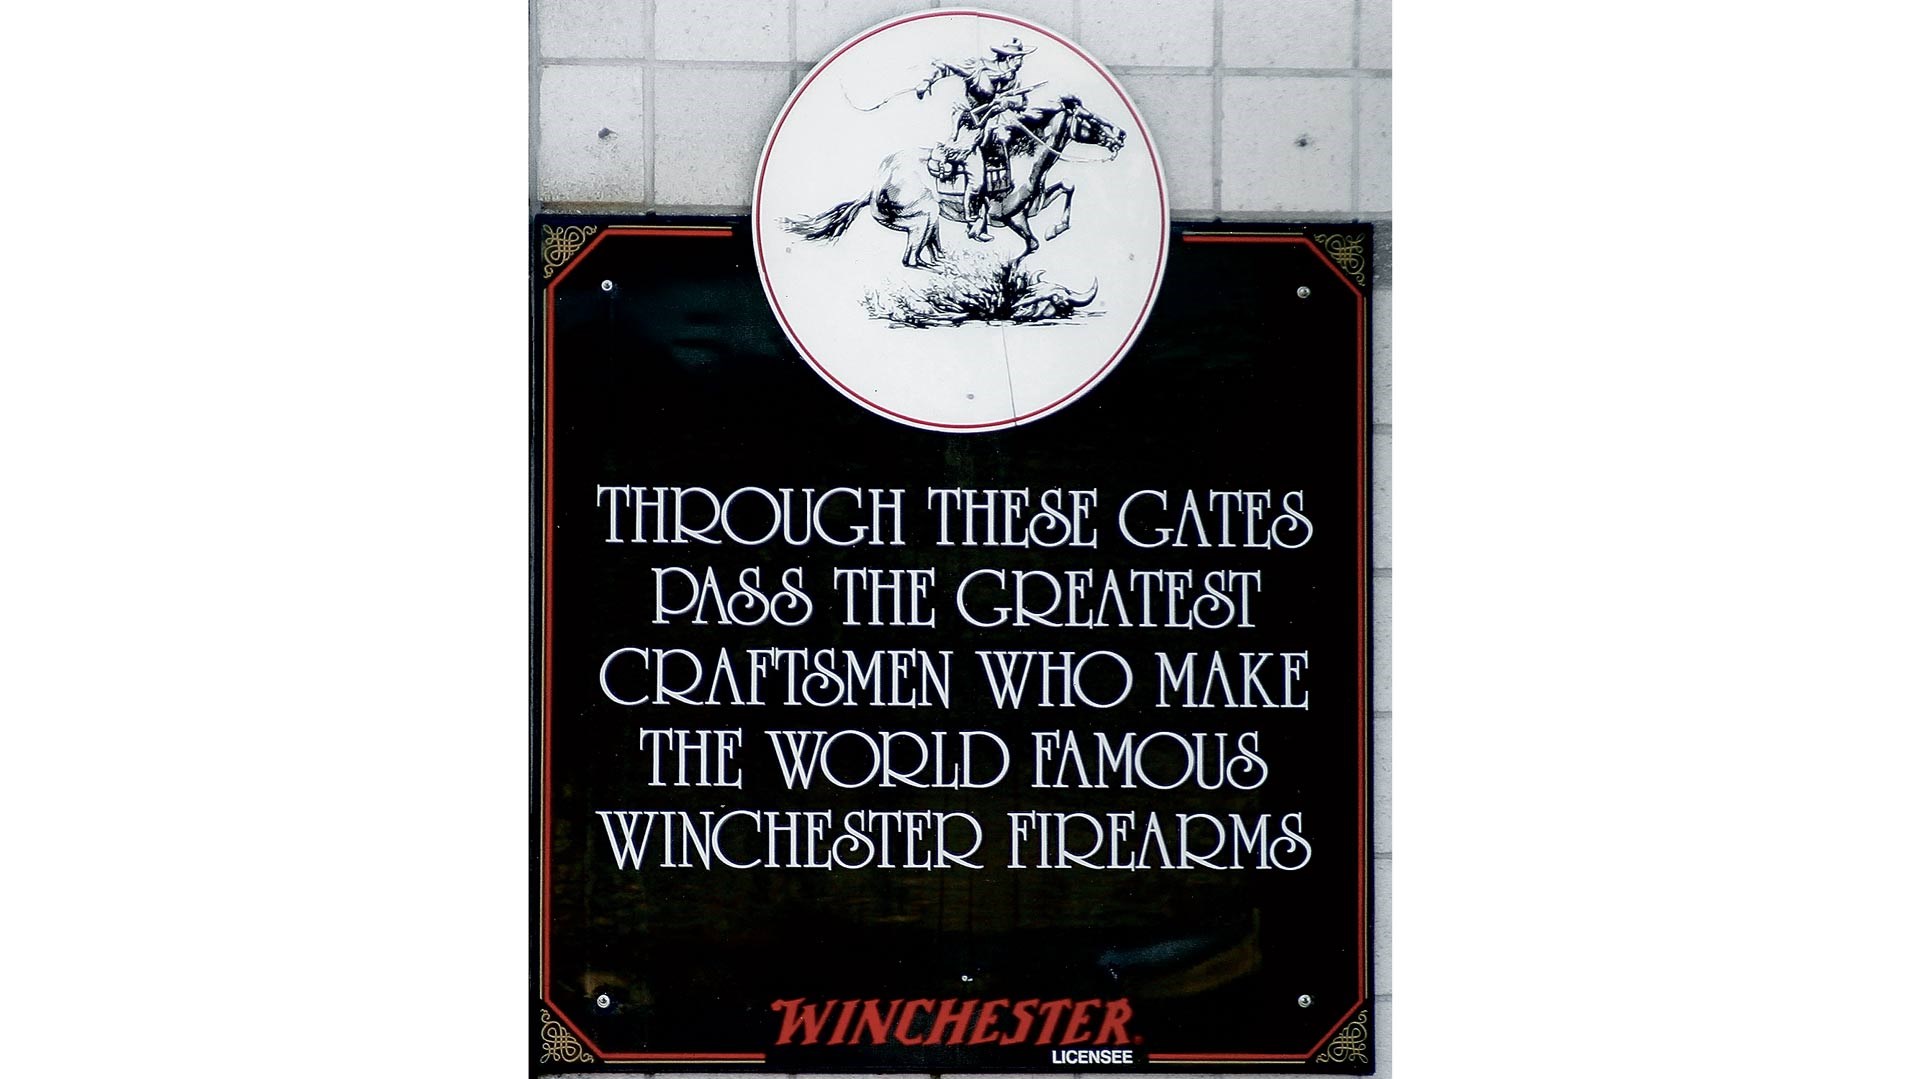 Winchester signage stating: Through these gates pass the greatest craftsmen who make the world famous winchester firearms.